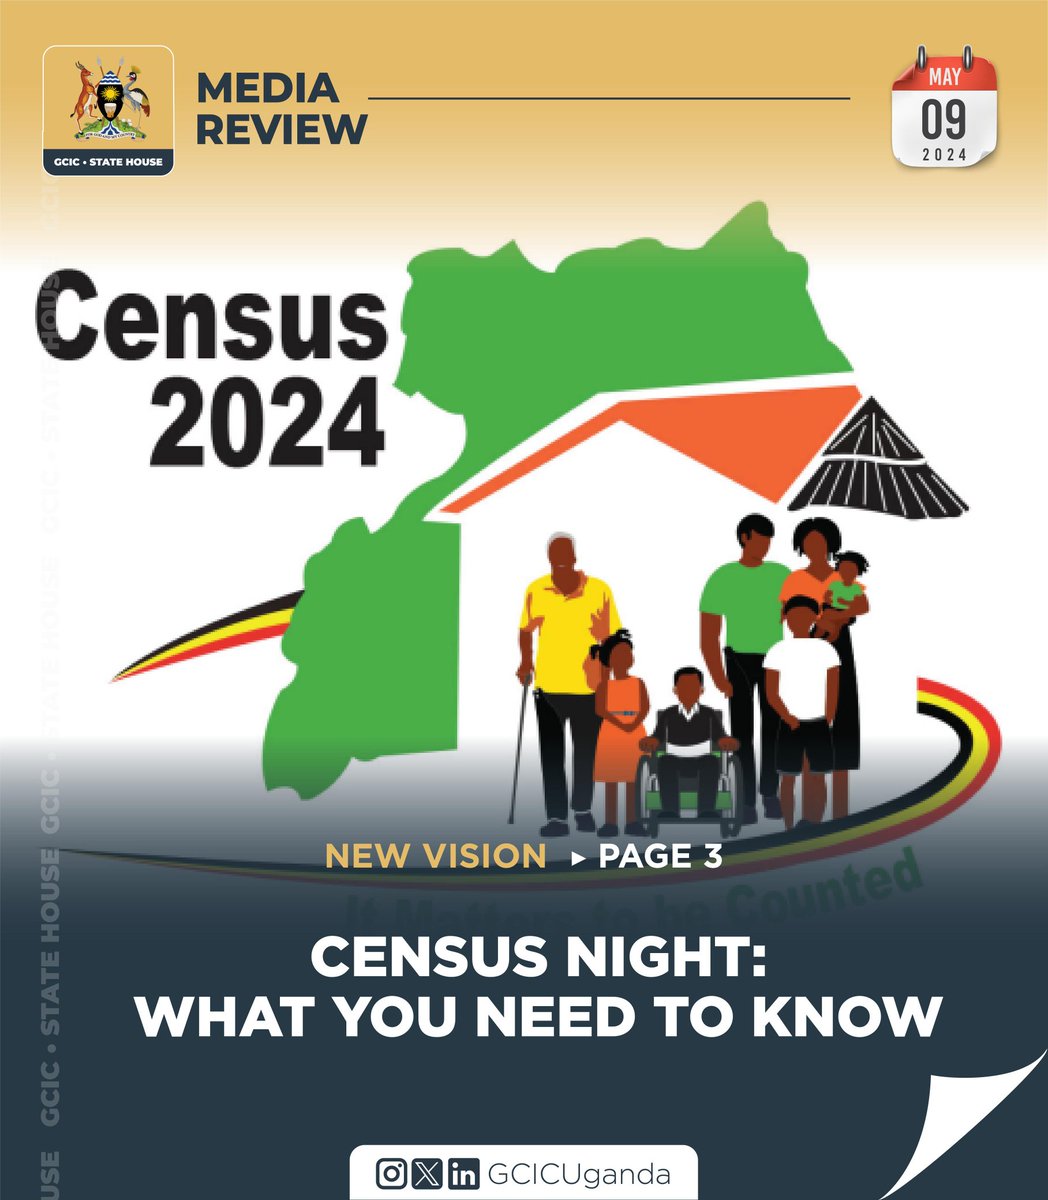 Stand and be counted!! 

Read more details of census in the #GCICMediaReview::

media.gcic.go.ug/gcic-media-rev…